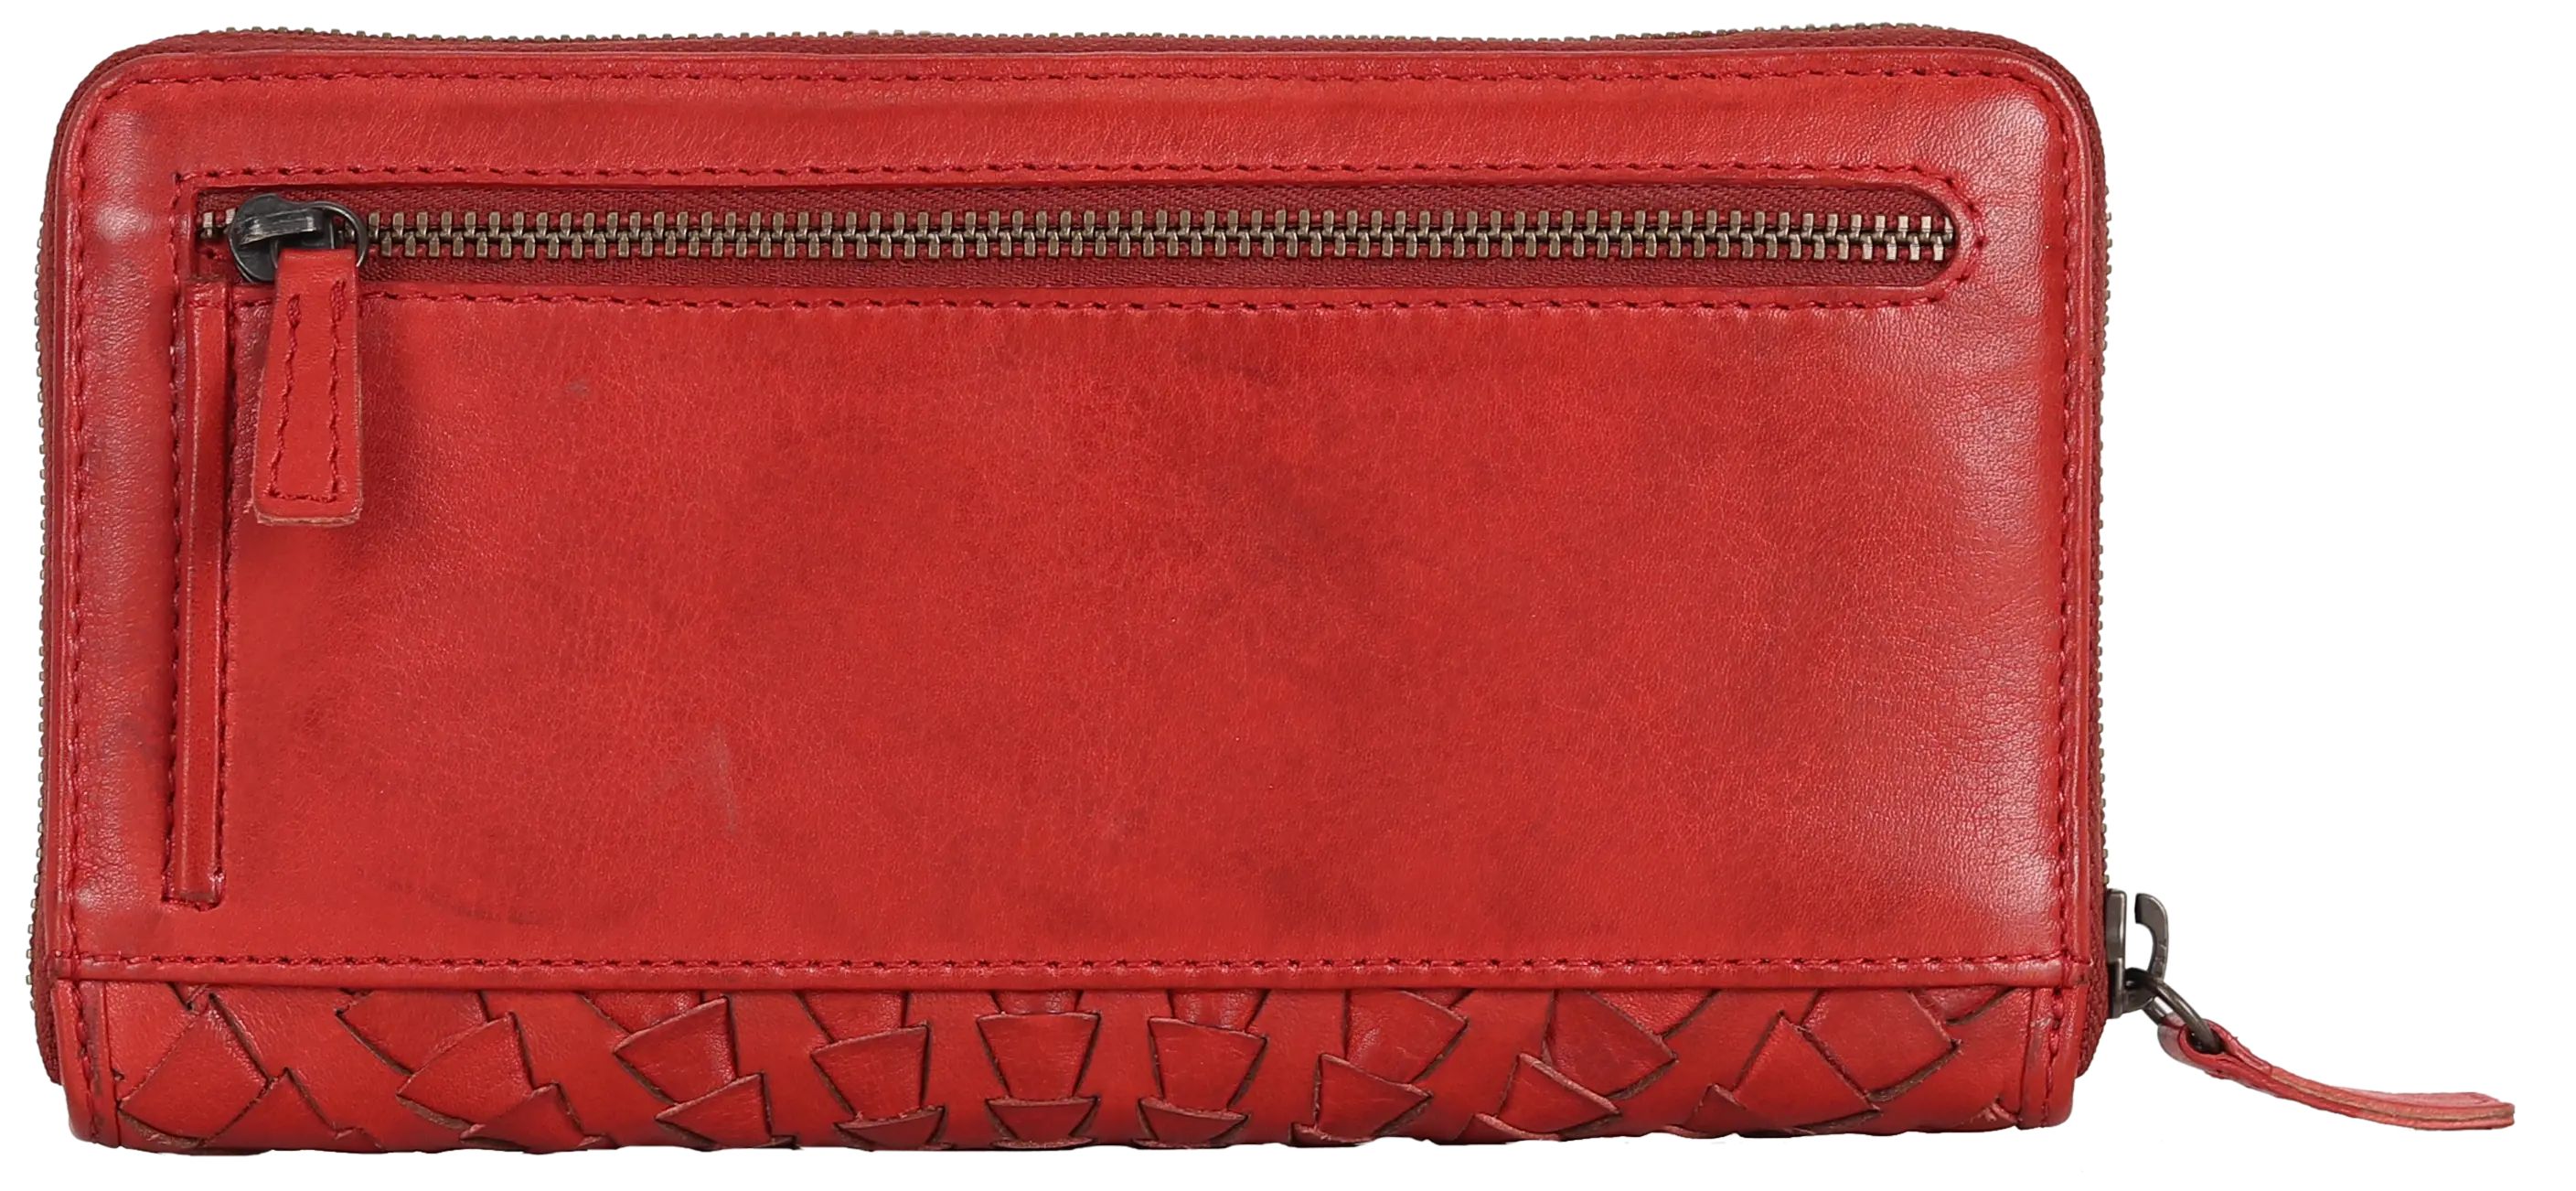 Rugged Earth Women's Wallet Zip Around Whip Stitch Women's Wallets Boutique of Leathers/Open Road